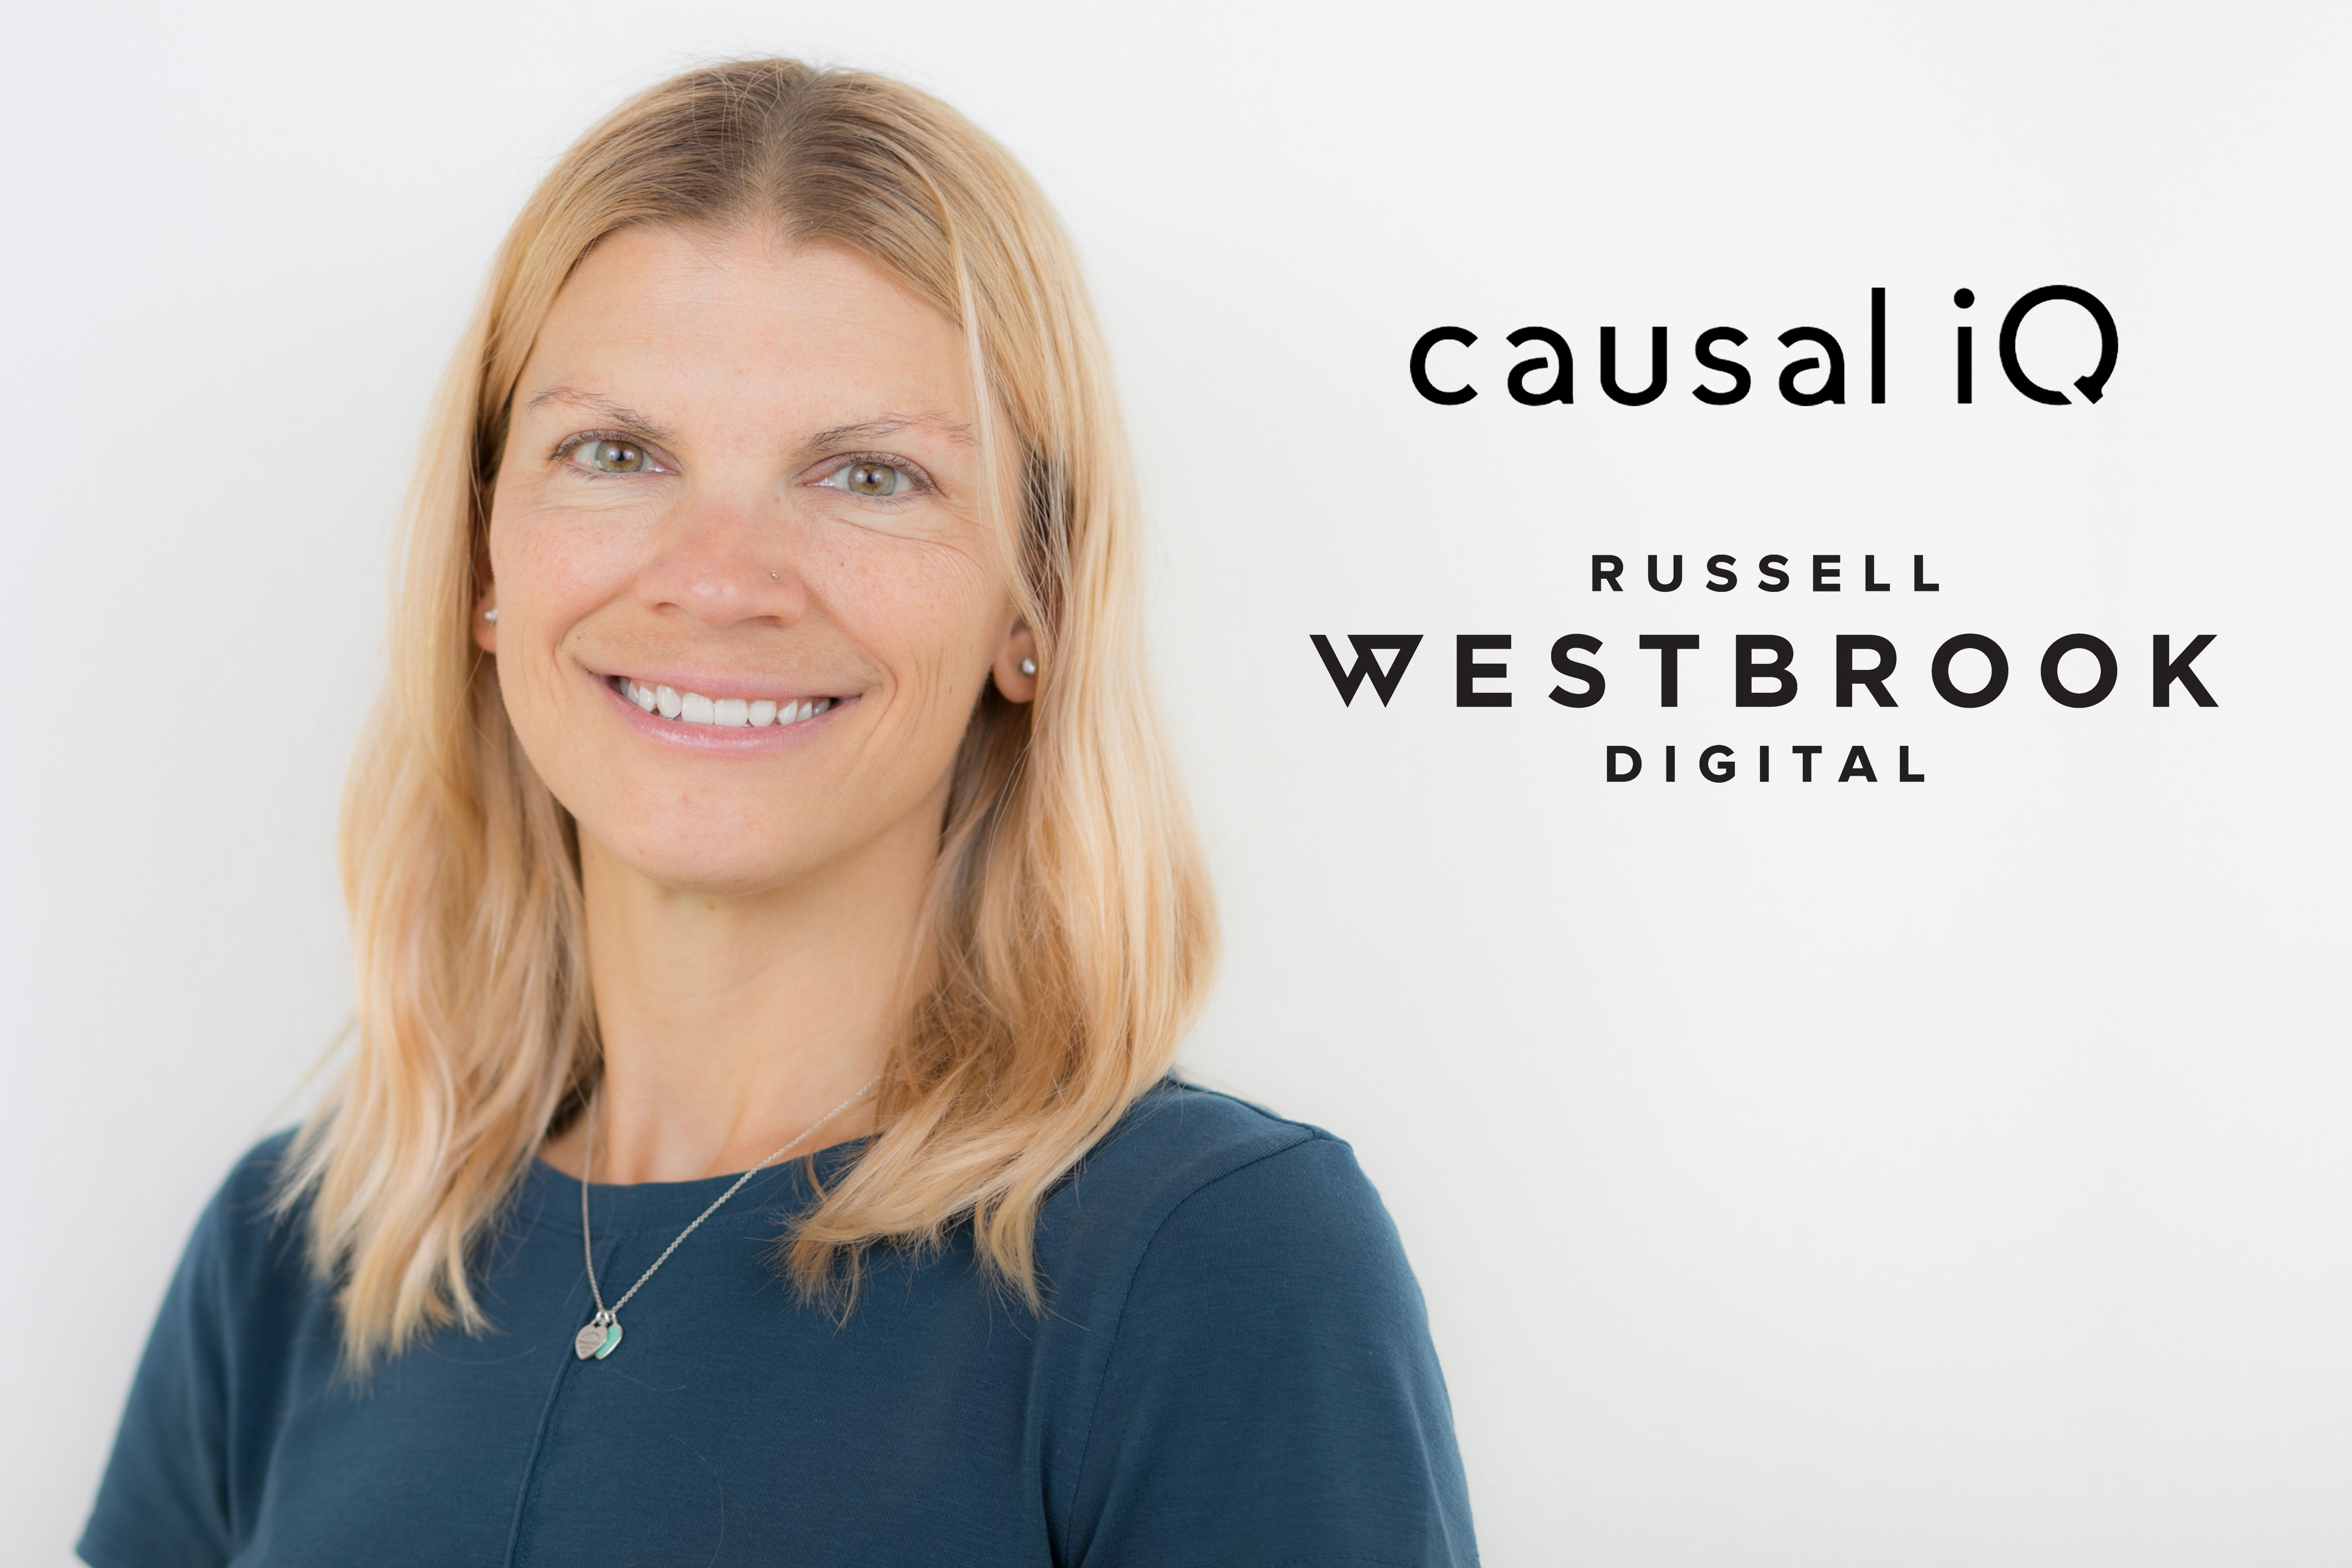 Image of Jennifer Lang for the Q&A with Jennifer Lang with the Causal IQ and Russell Westbrook Digital logos